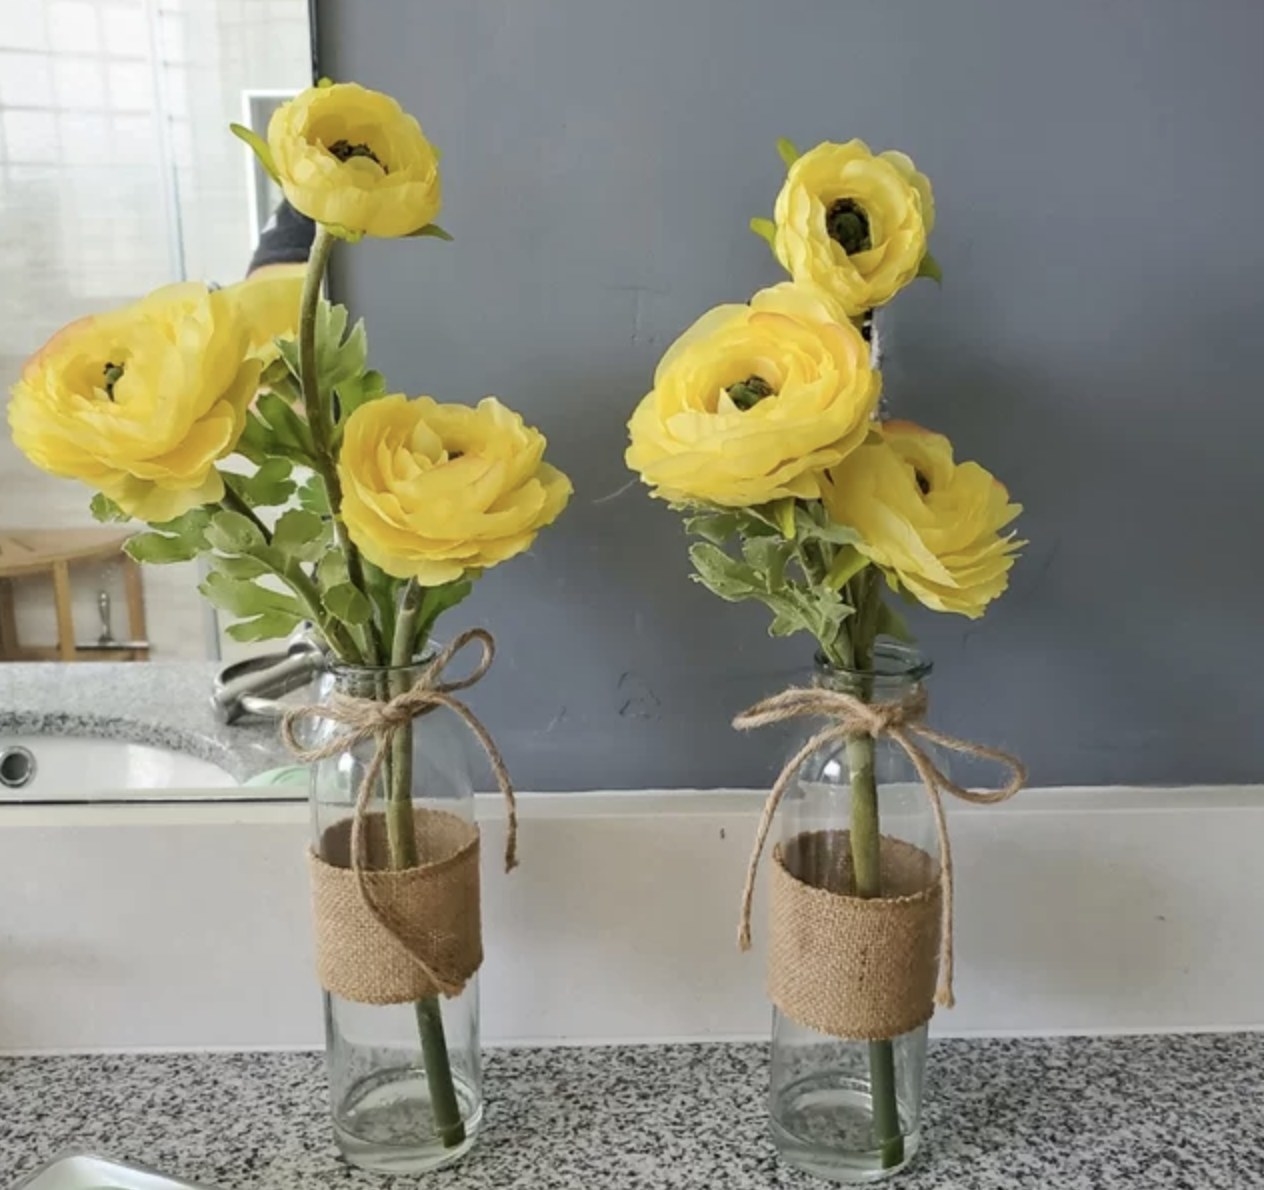 A reviewer photo of faux floral arrangements in vases